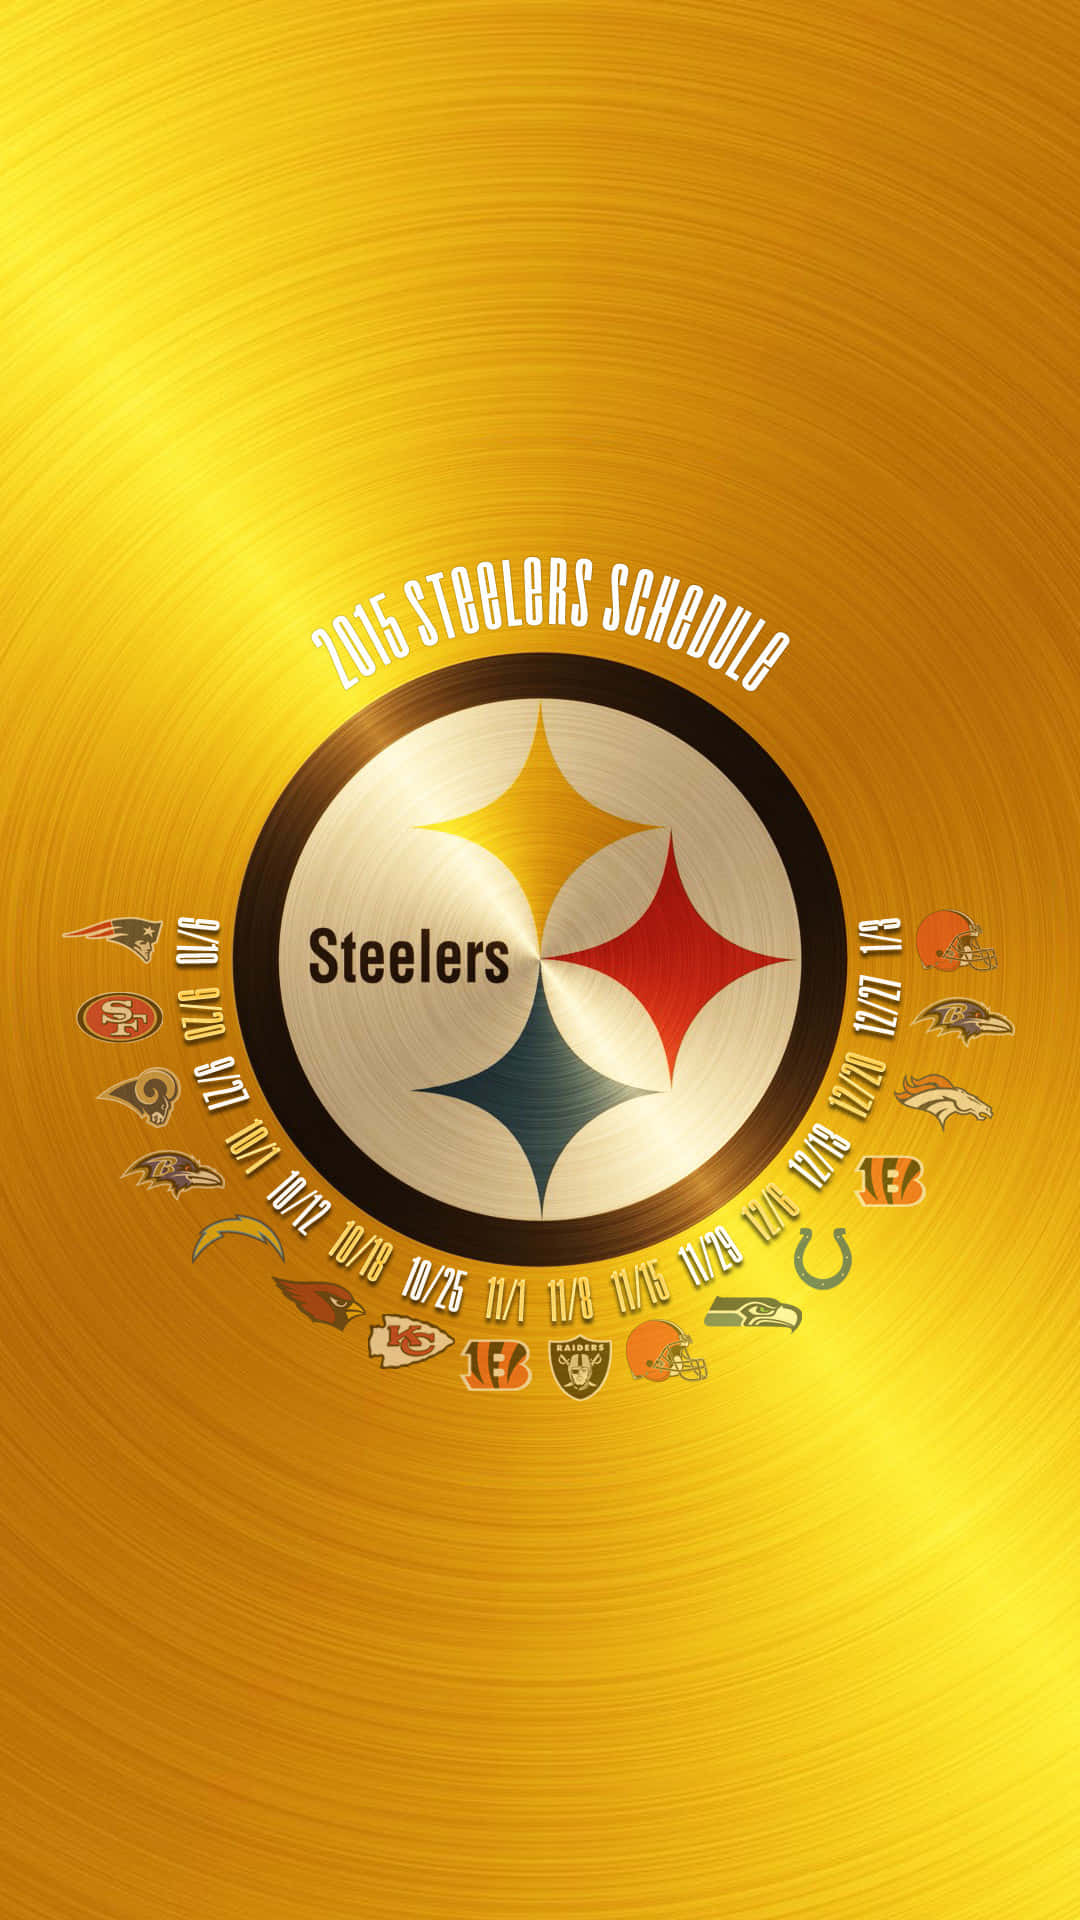 Show your Steeler Pride with the Pittsburgh Steelers themed Iphone Wallpaper